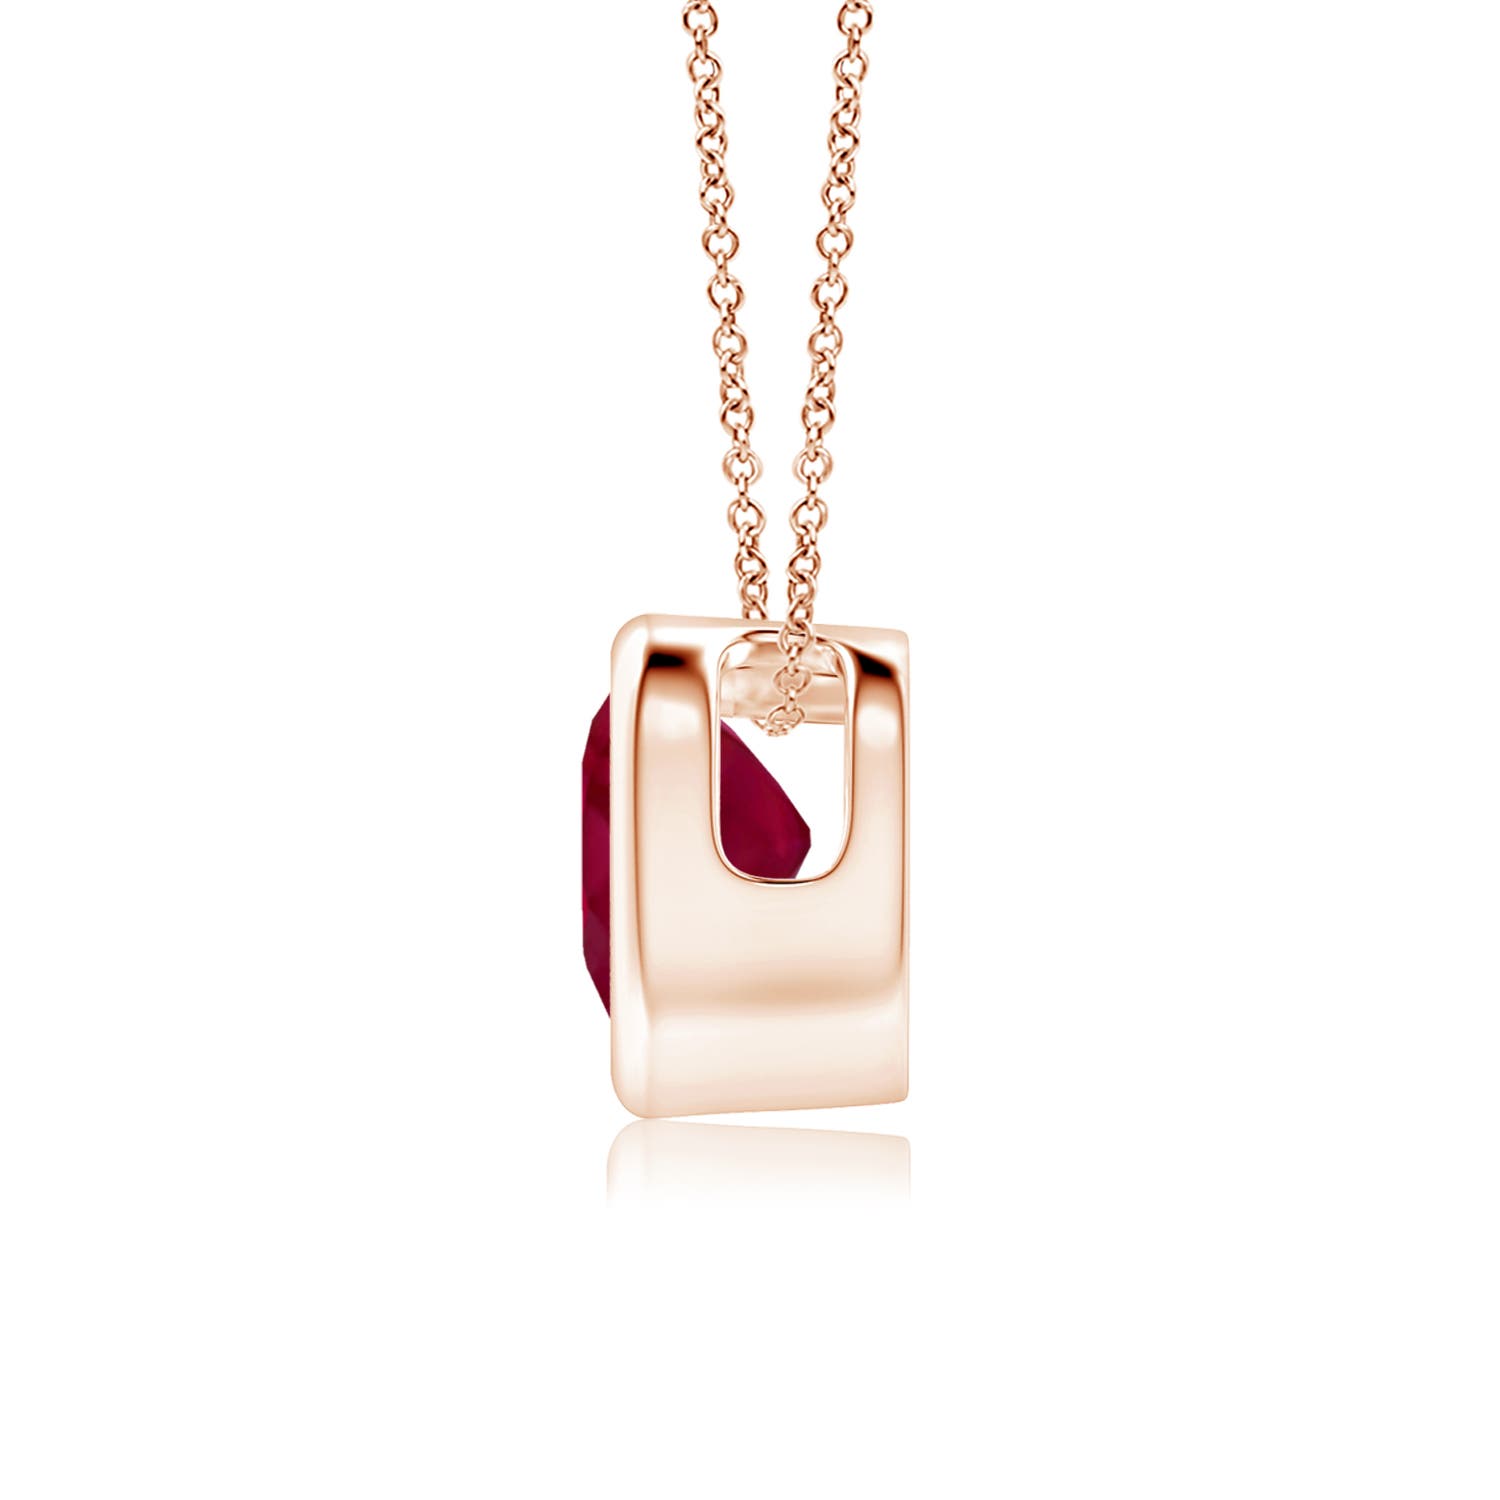 A - Ruby / 0.55 CT / 14 KT Rose Gold